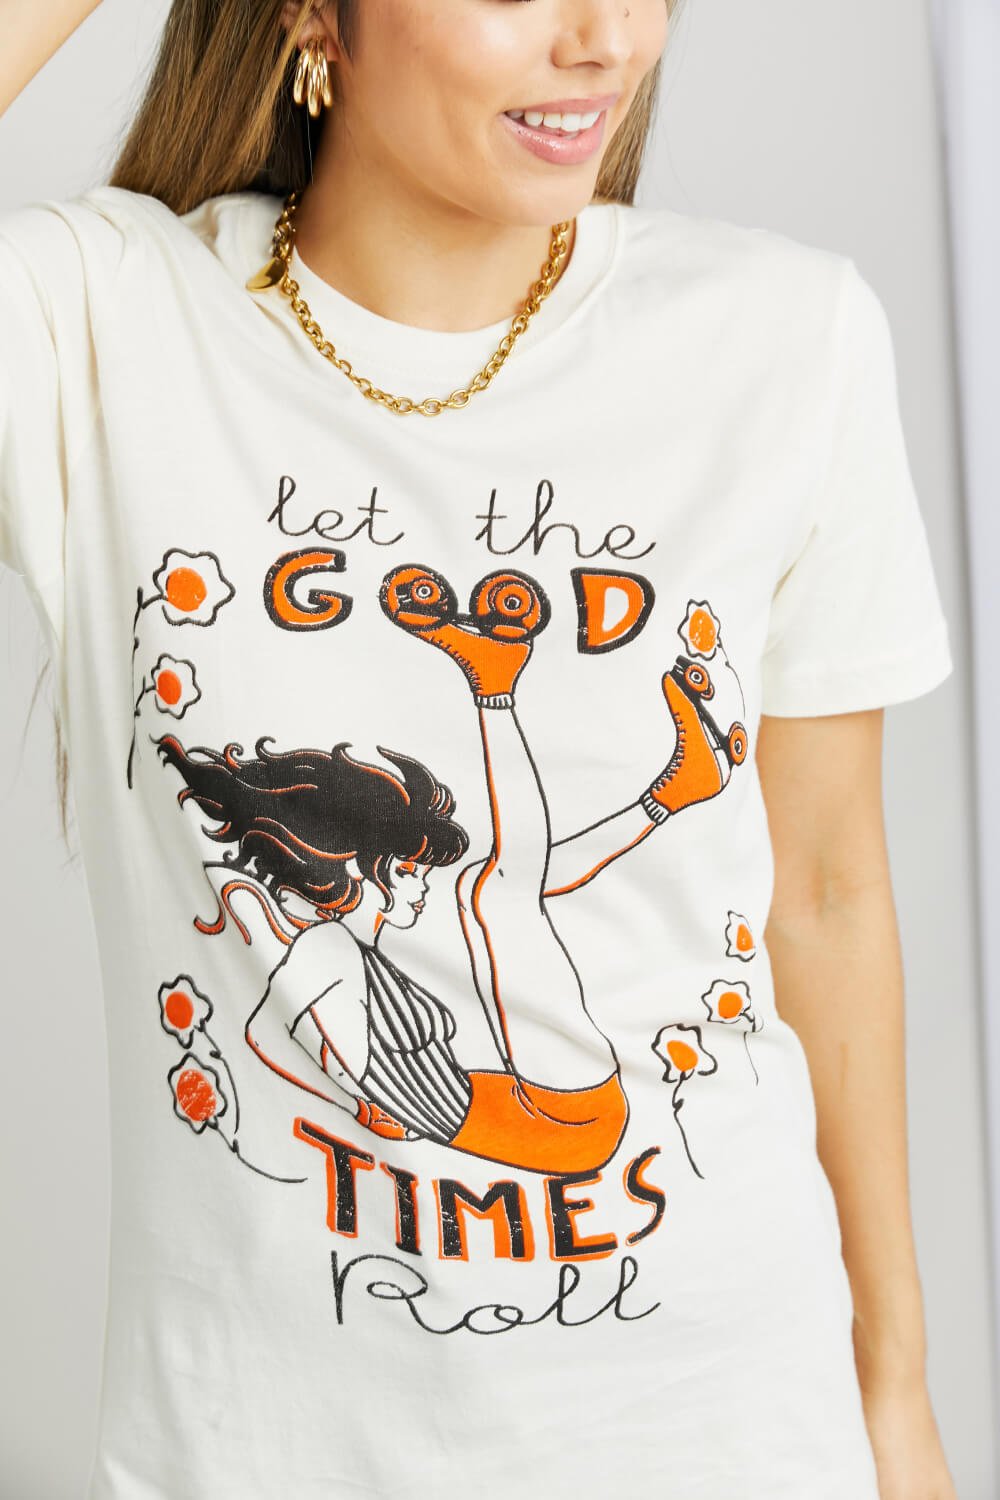 LET THE GOOD TIMES ROLL Roller Skate Graphic Cotton Tee in WhiteTeemineB